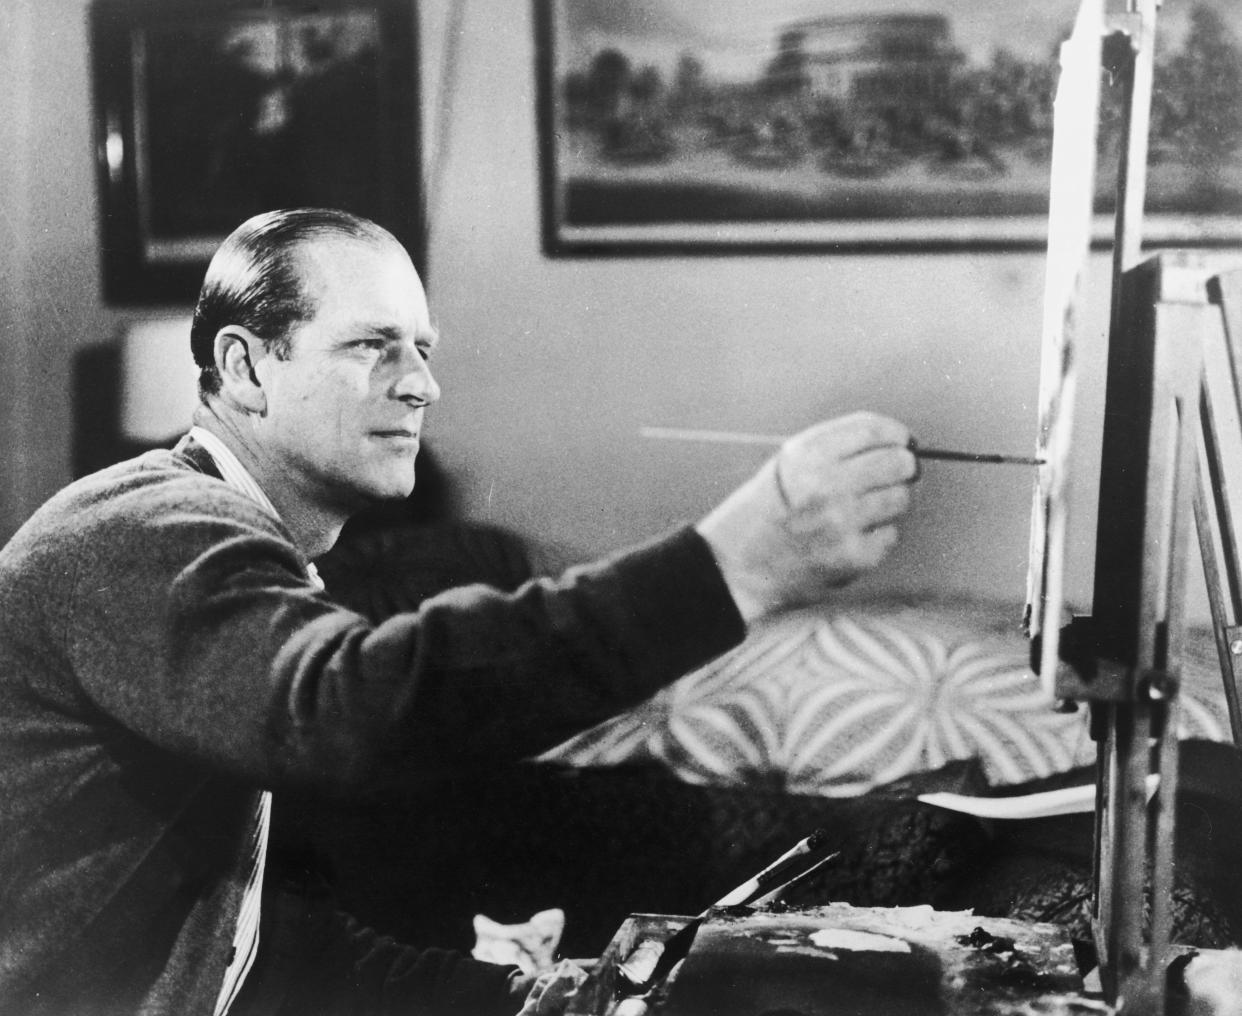 The Duke of Edinburgh at work painting in a scene from the film. (Photo: Keystone/Hulton Archive/Getty Images)